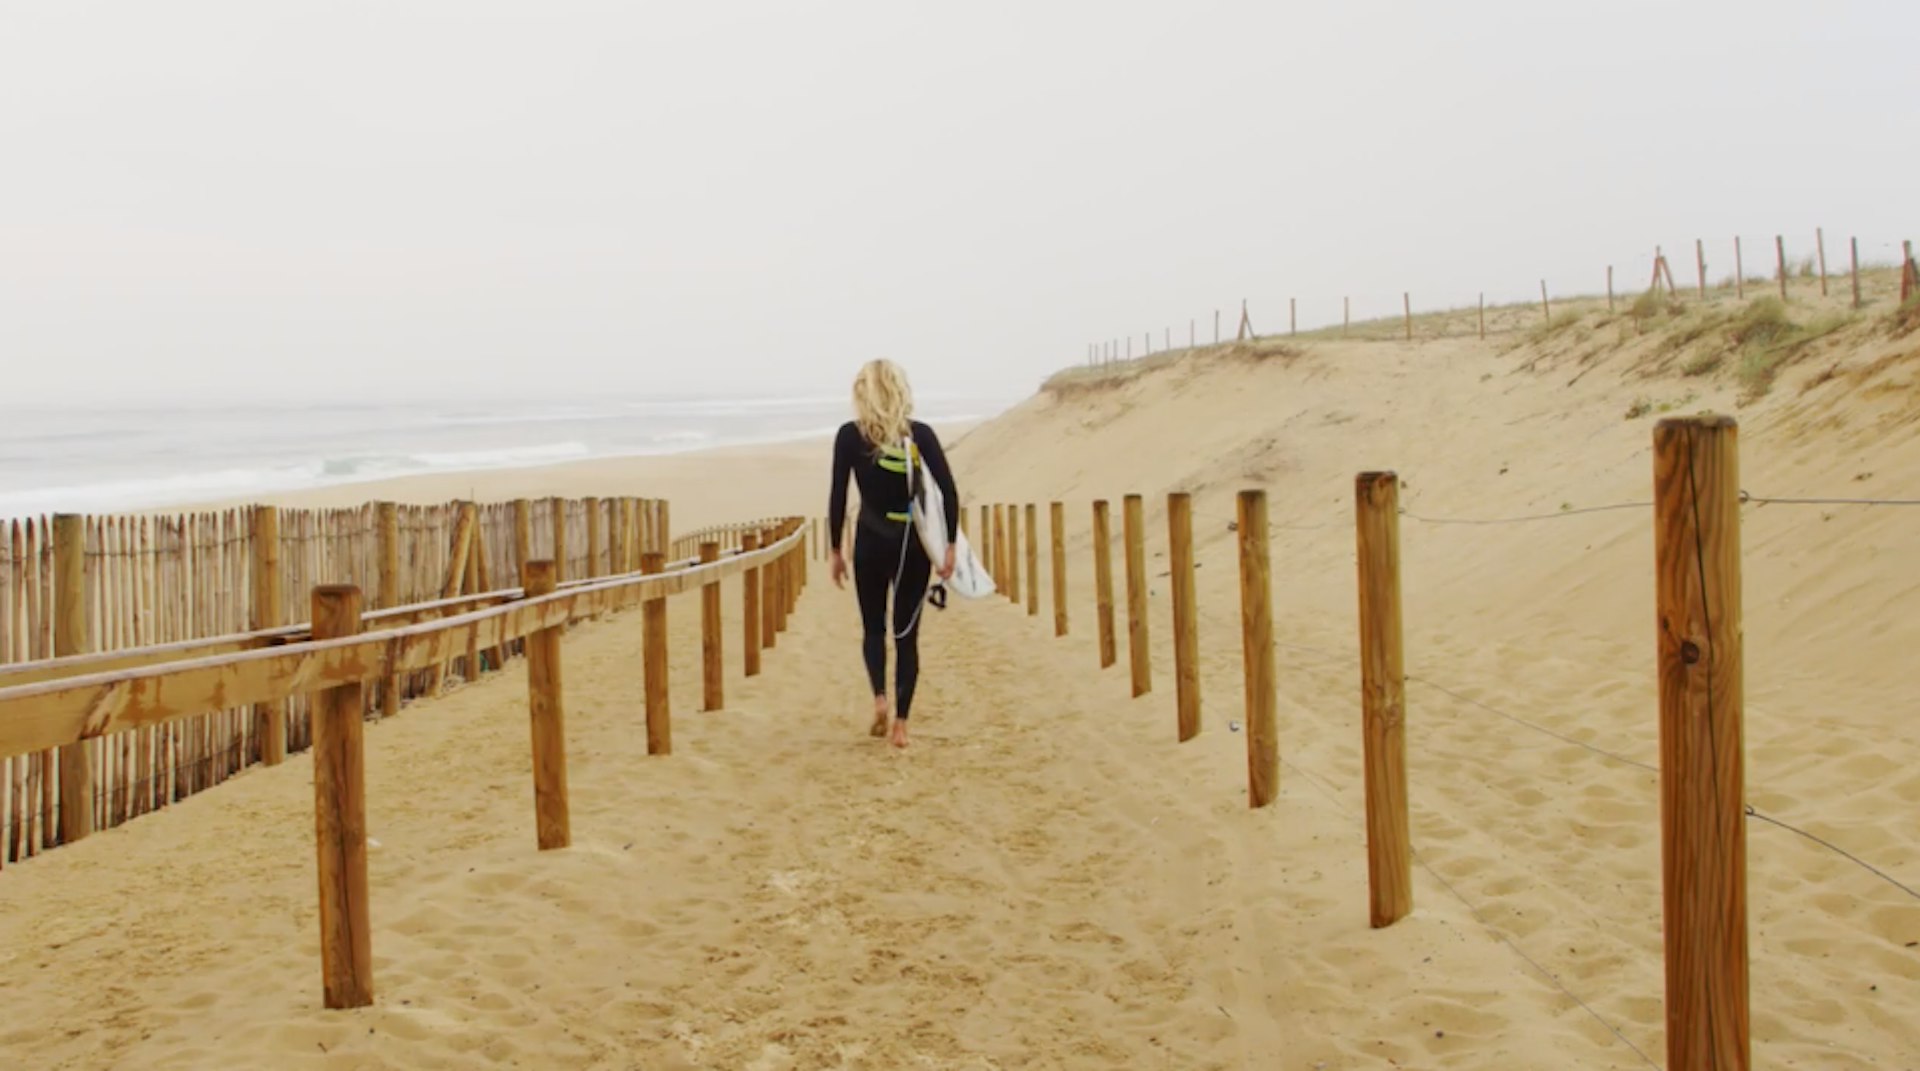 Stephanie Gilmore shines in cinematic new surf edit shot in France